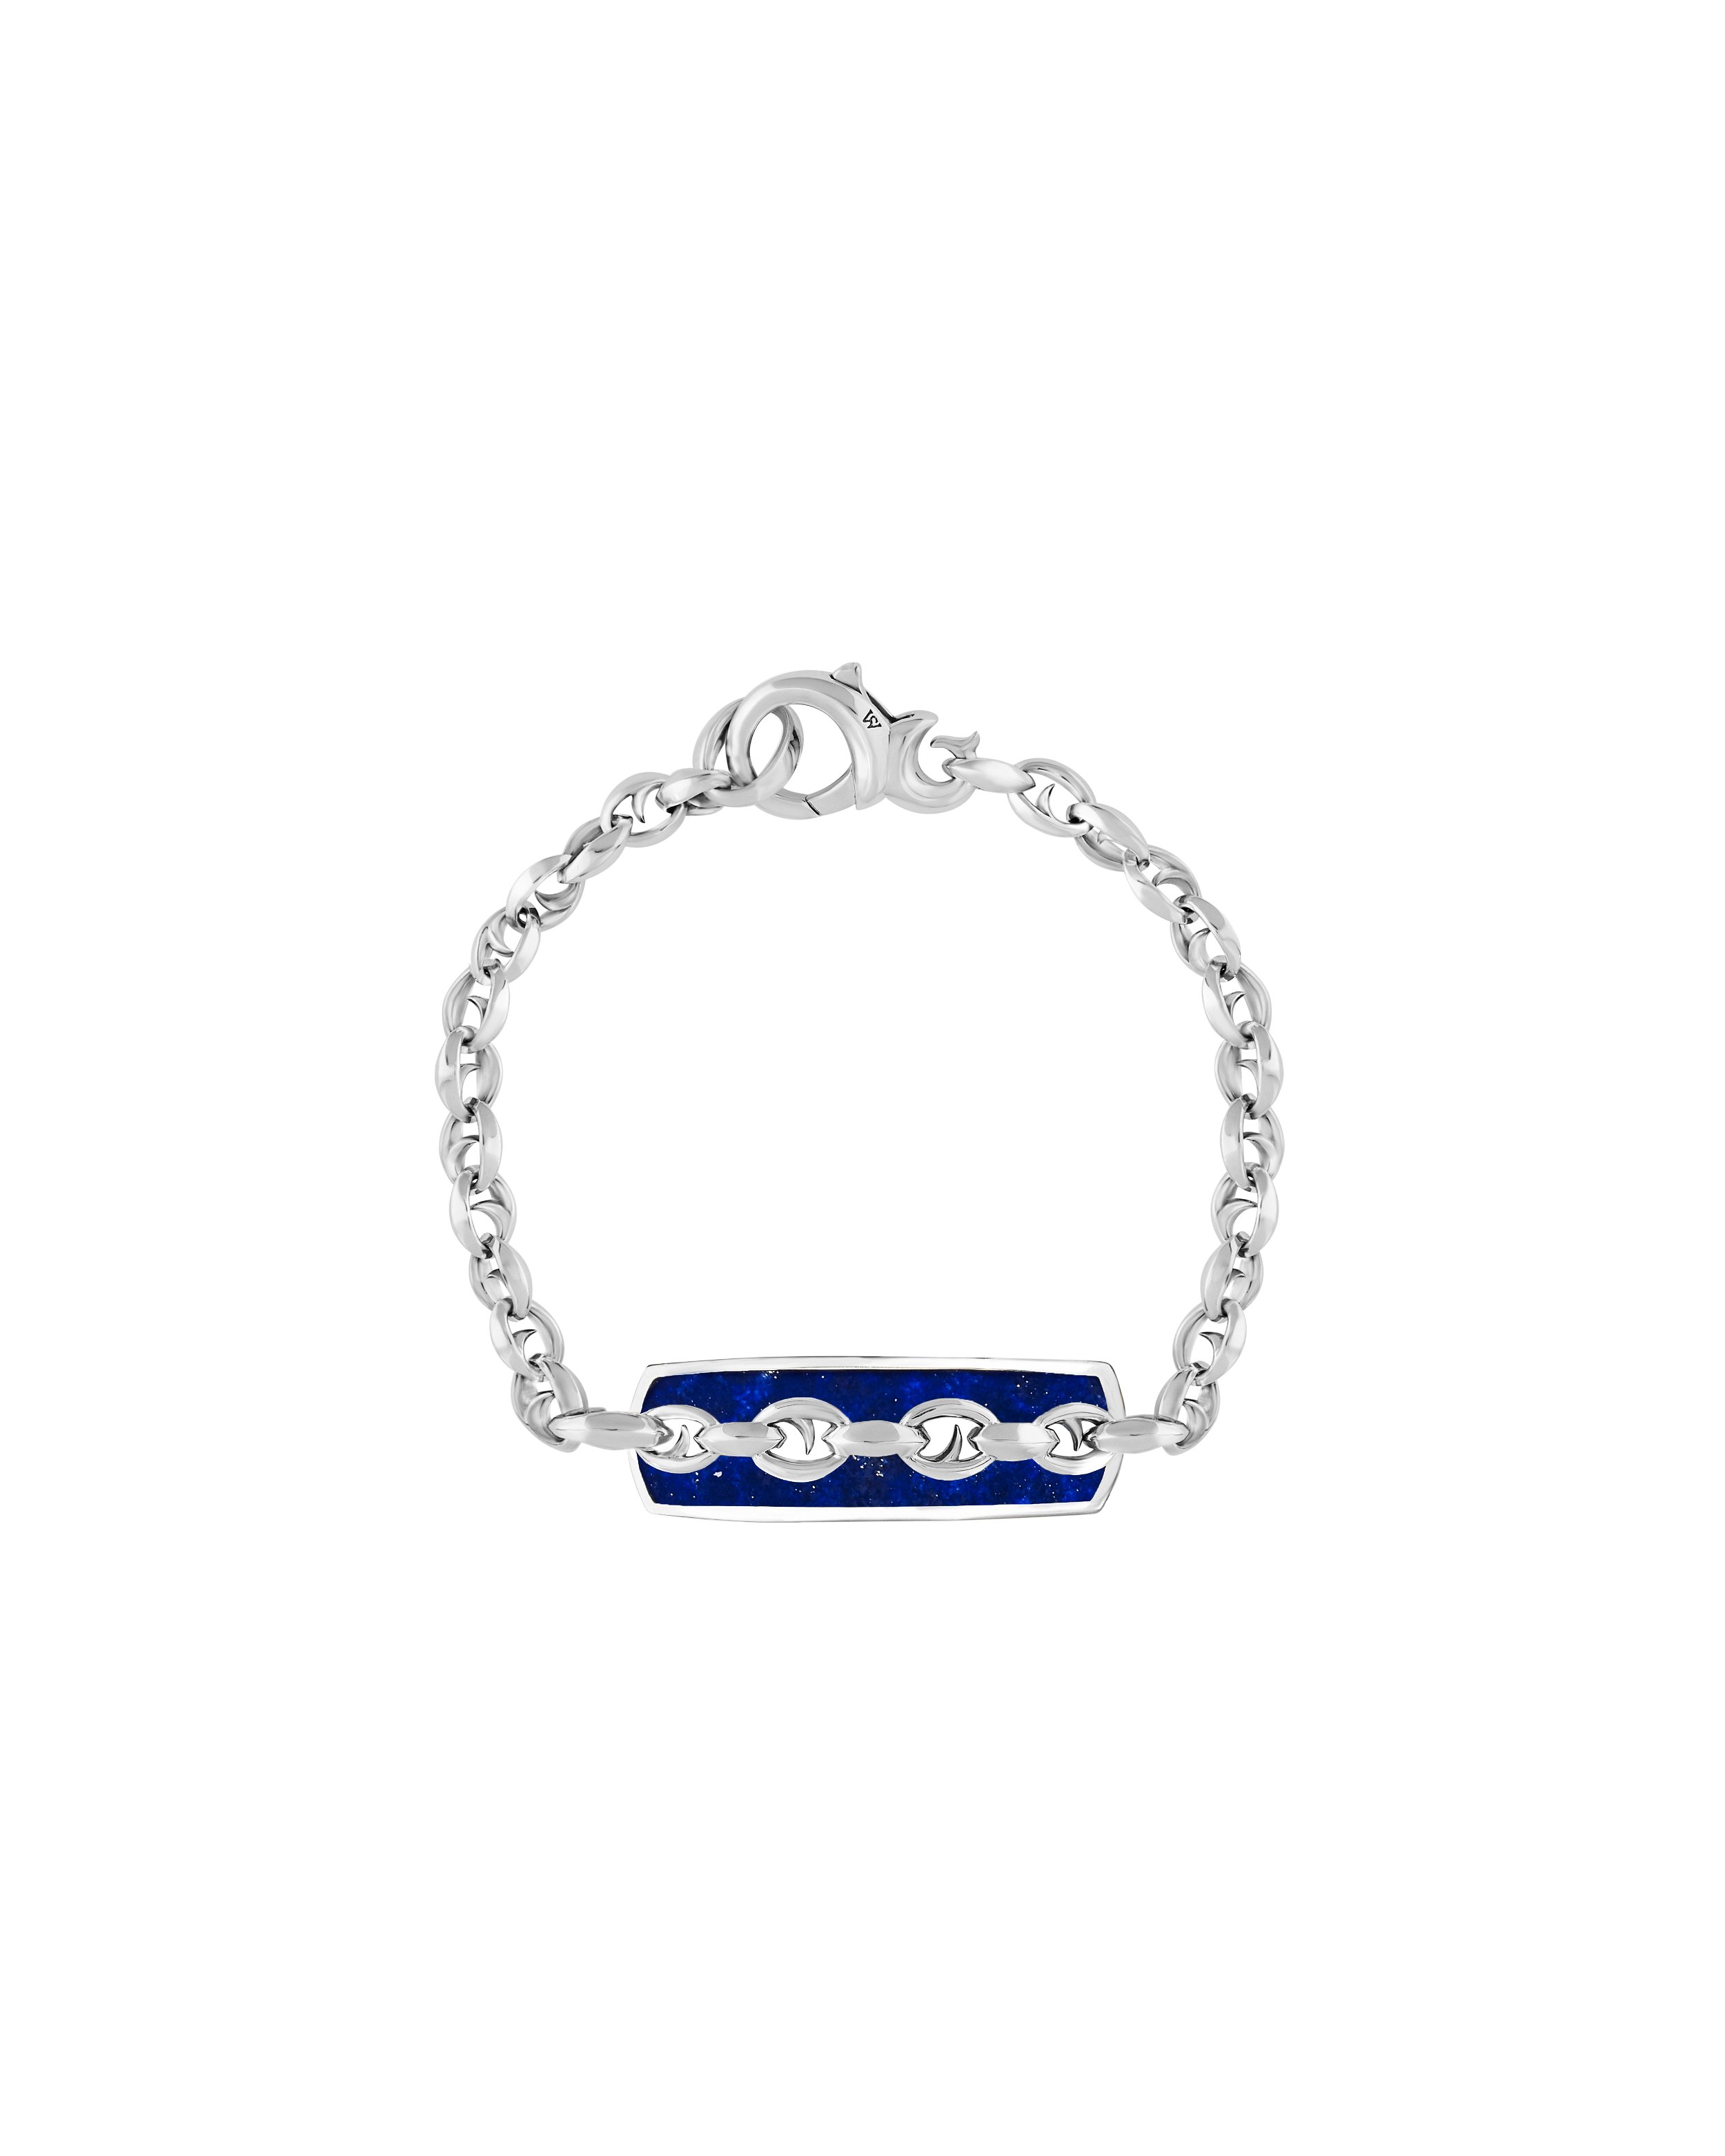 Thorn Addiction Inline Razer Bracelet with Lapis in Sterling Silver - 8.75" Long